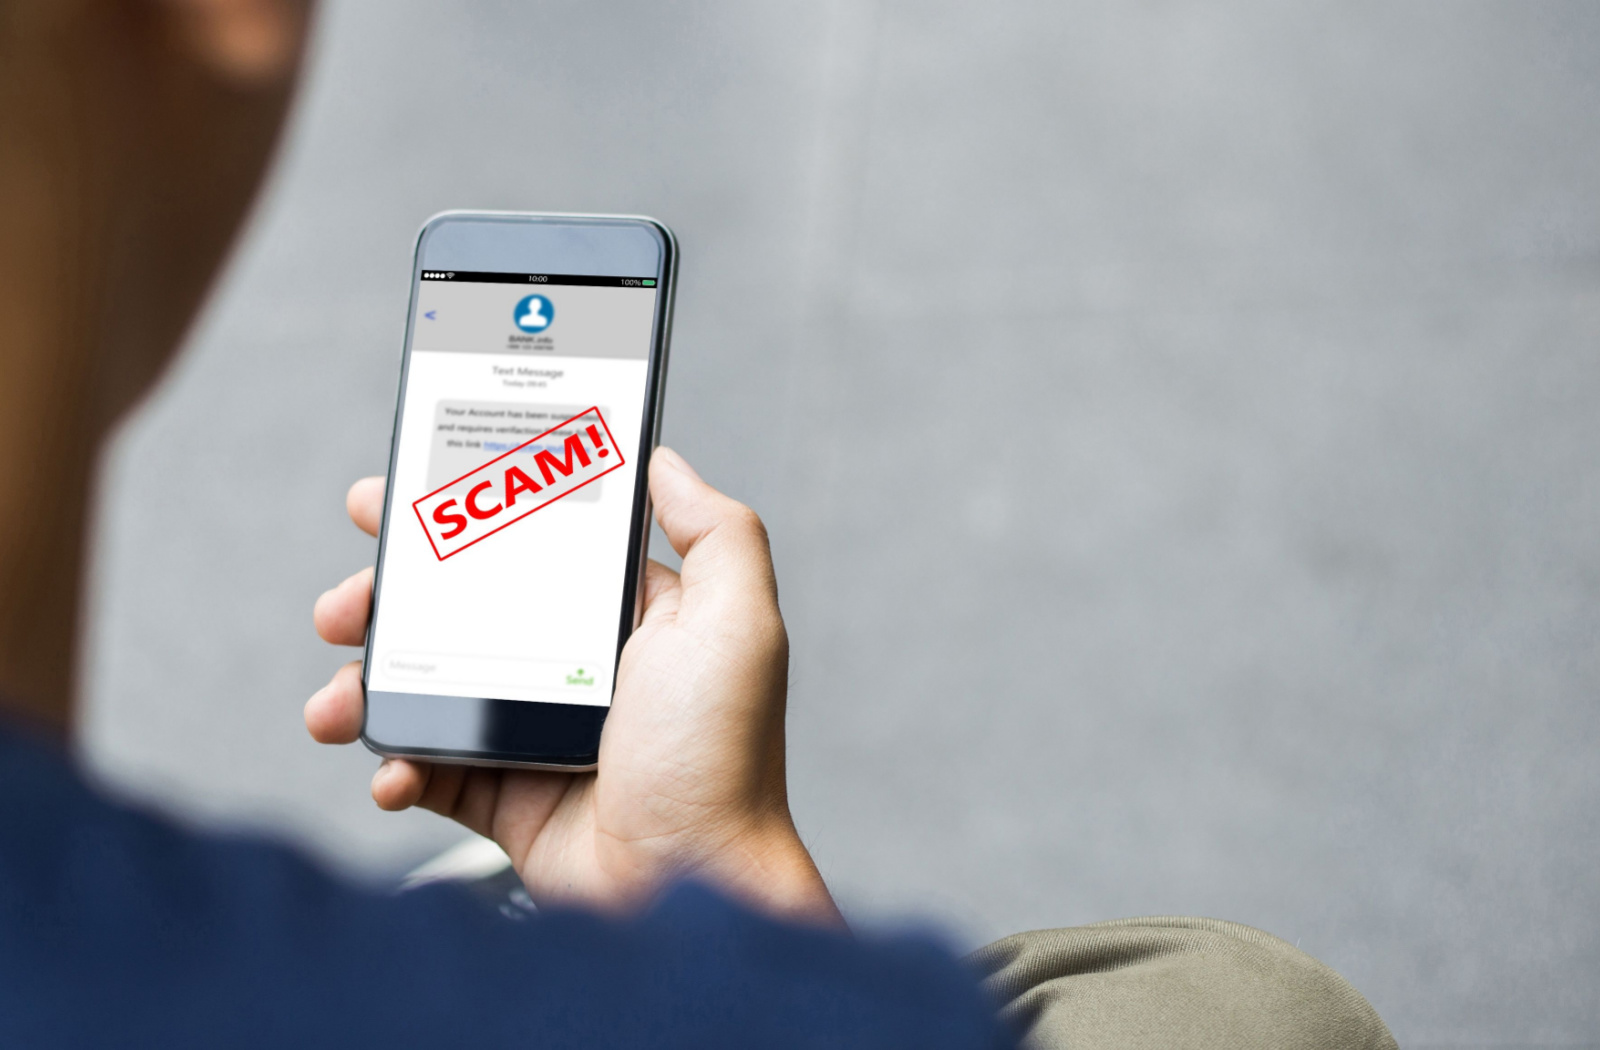 A close-up of someone holding a smartphone with a SCAM! warning message in red text across the screen